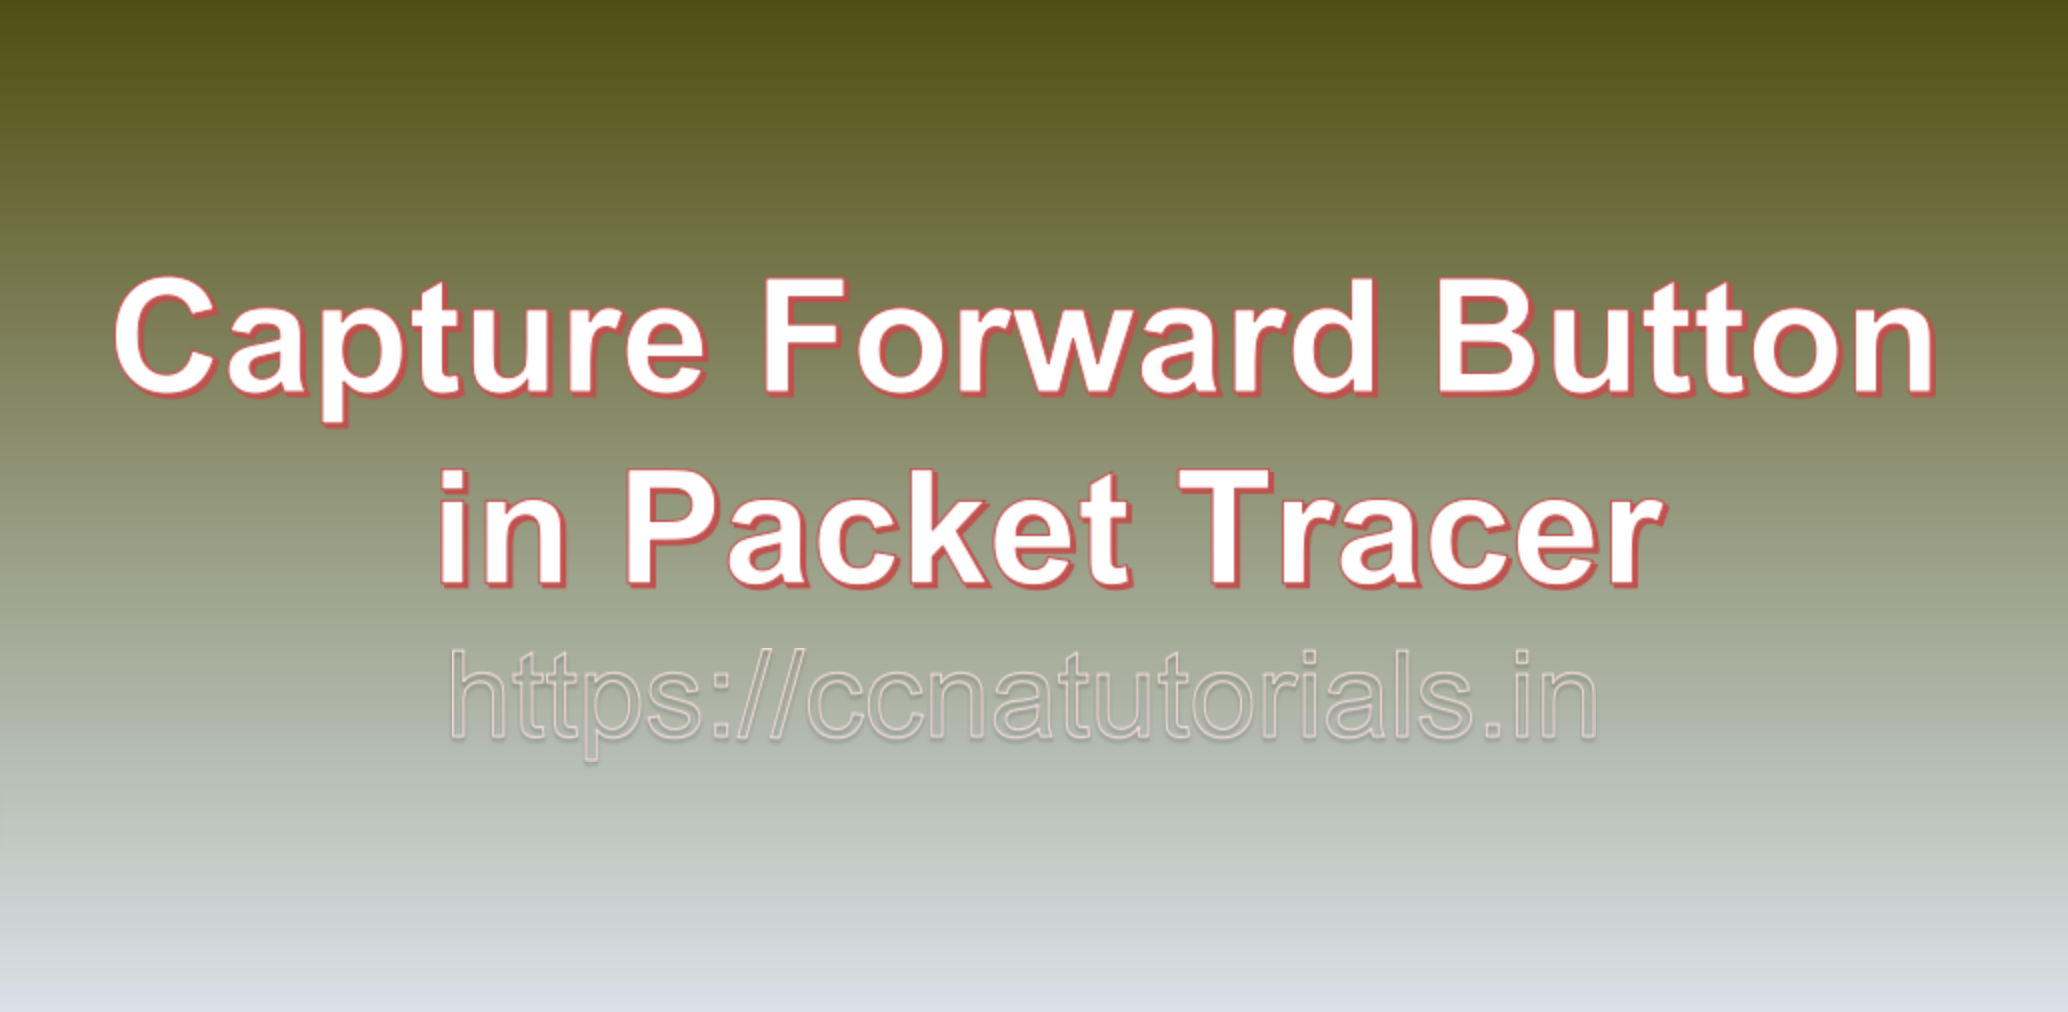 Capture Forward Button in Packet Tracer, ccna, ccna tutorials